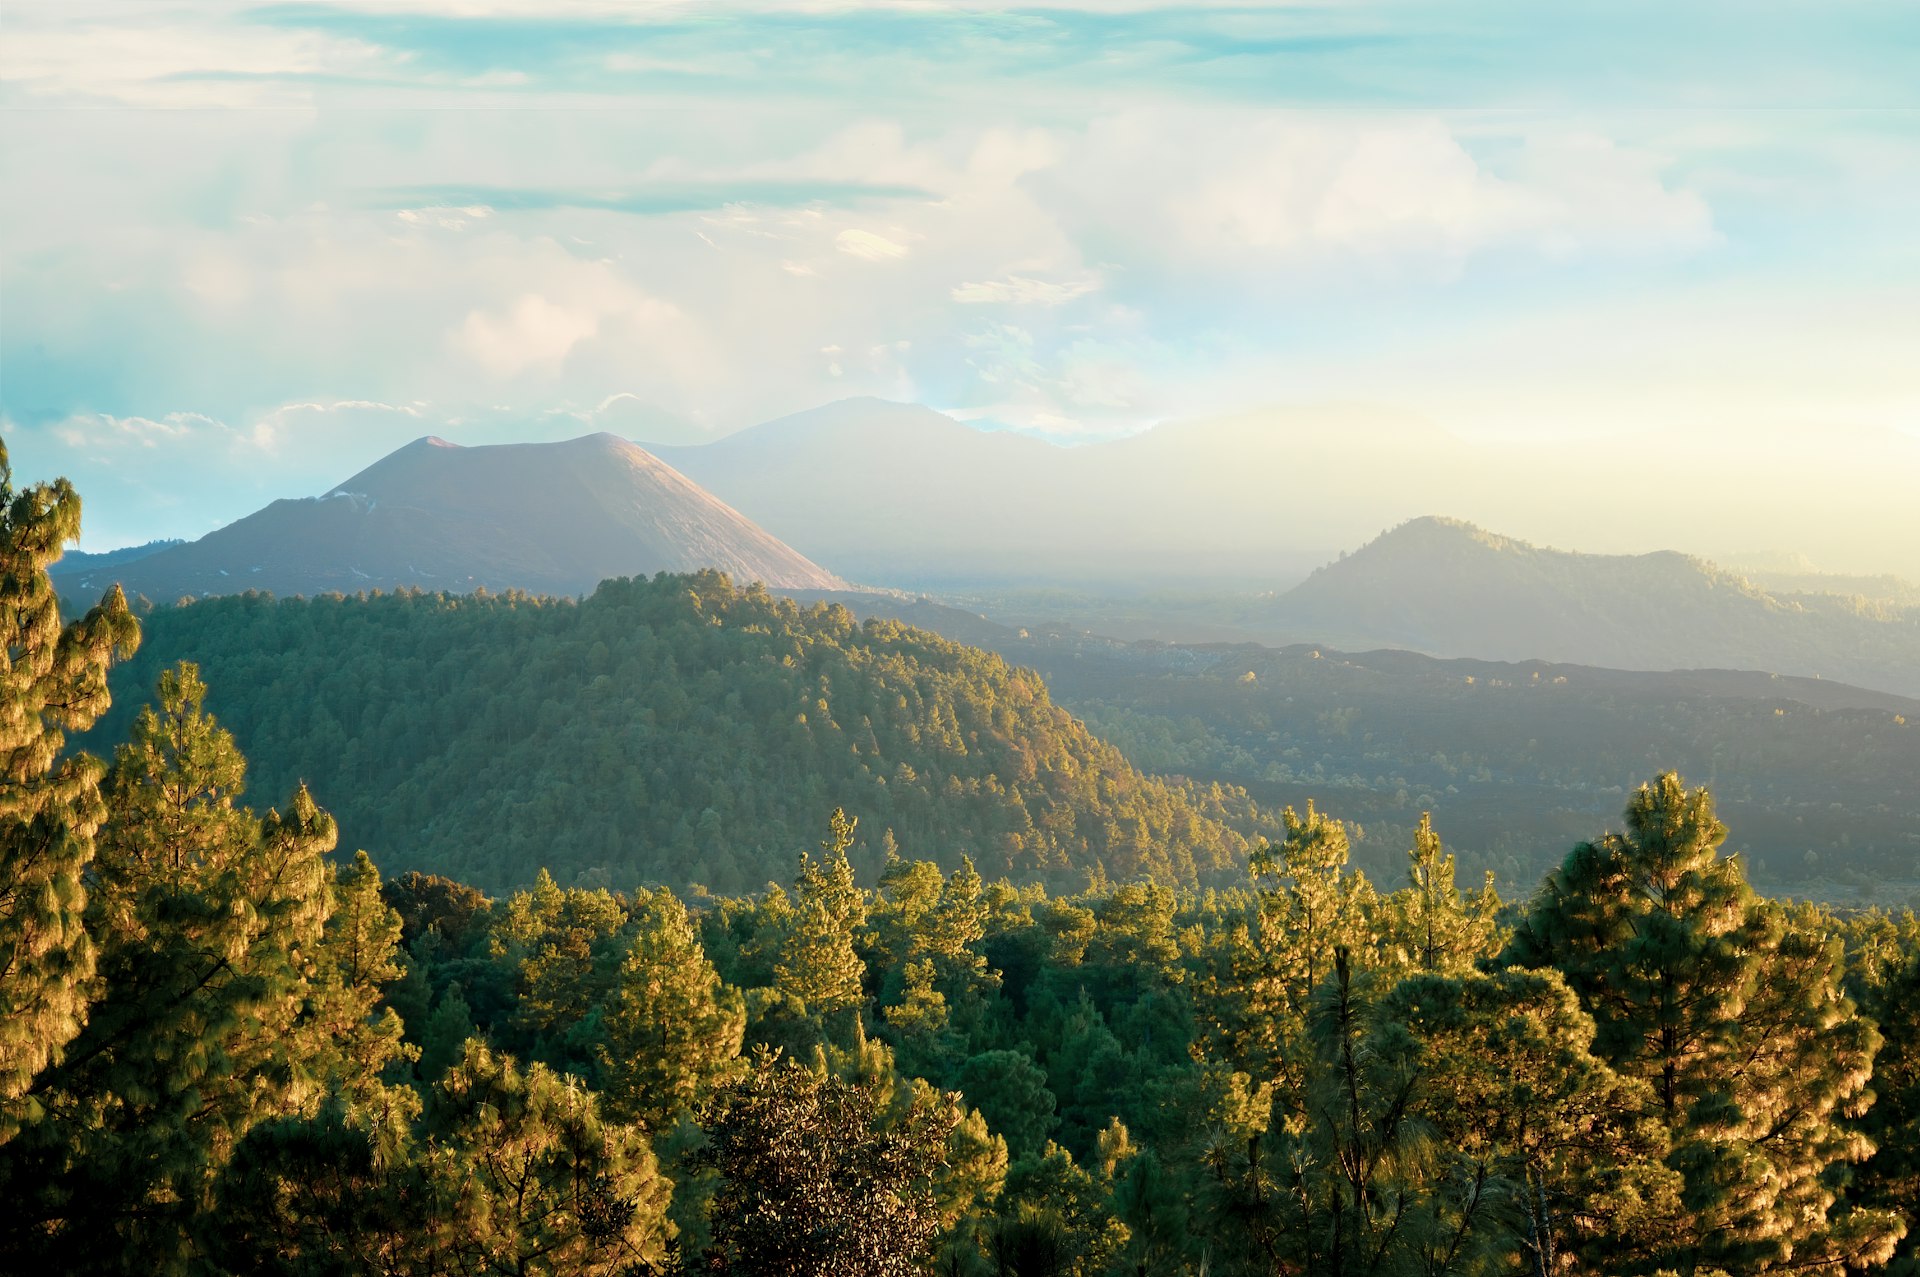 A scenic shot of Mexico's landscape with Volcán Paricutin in the distance